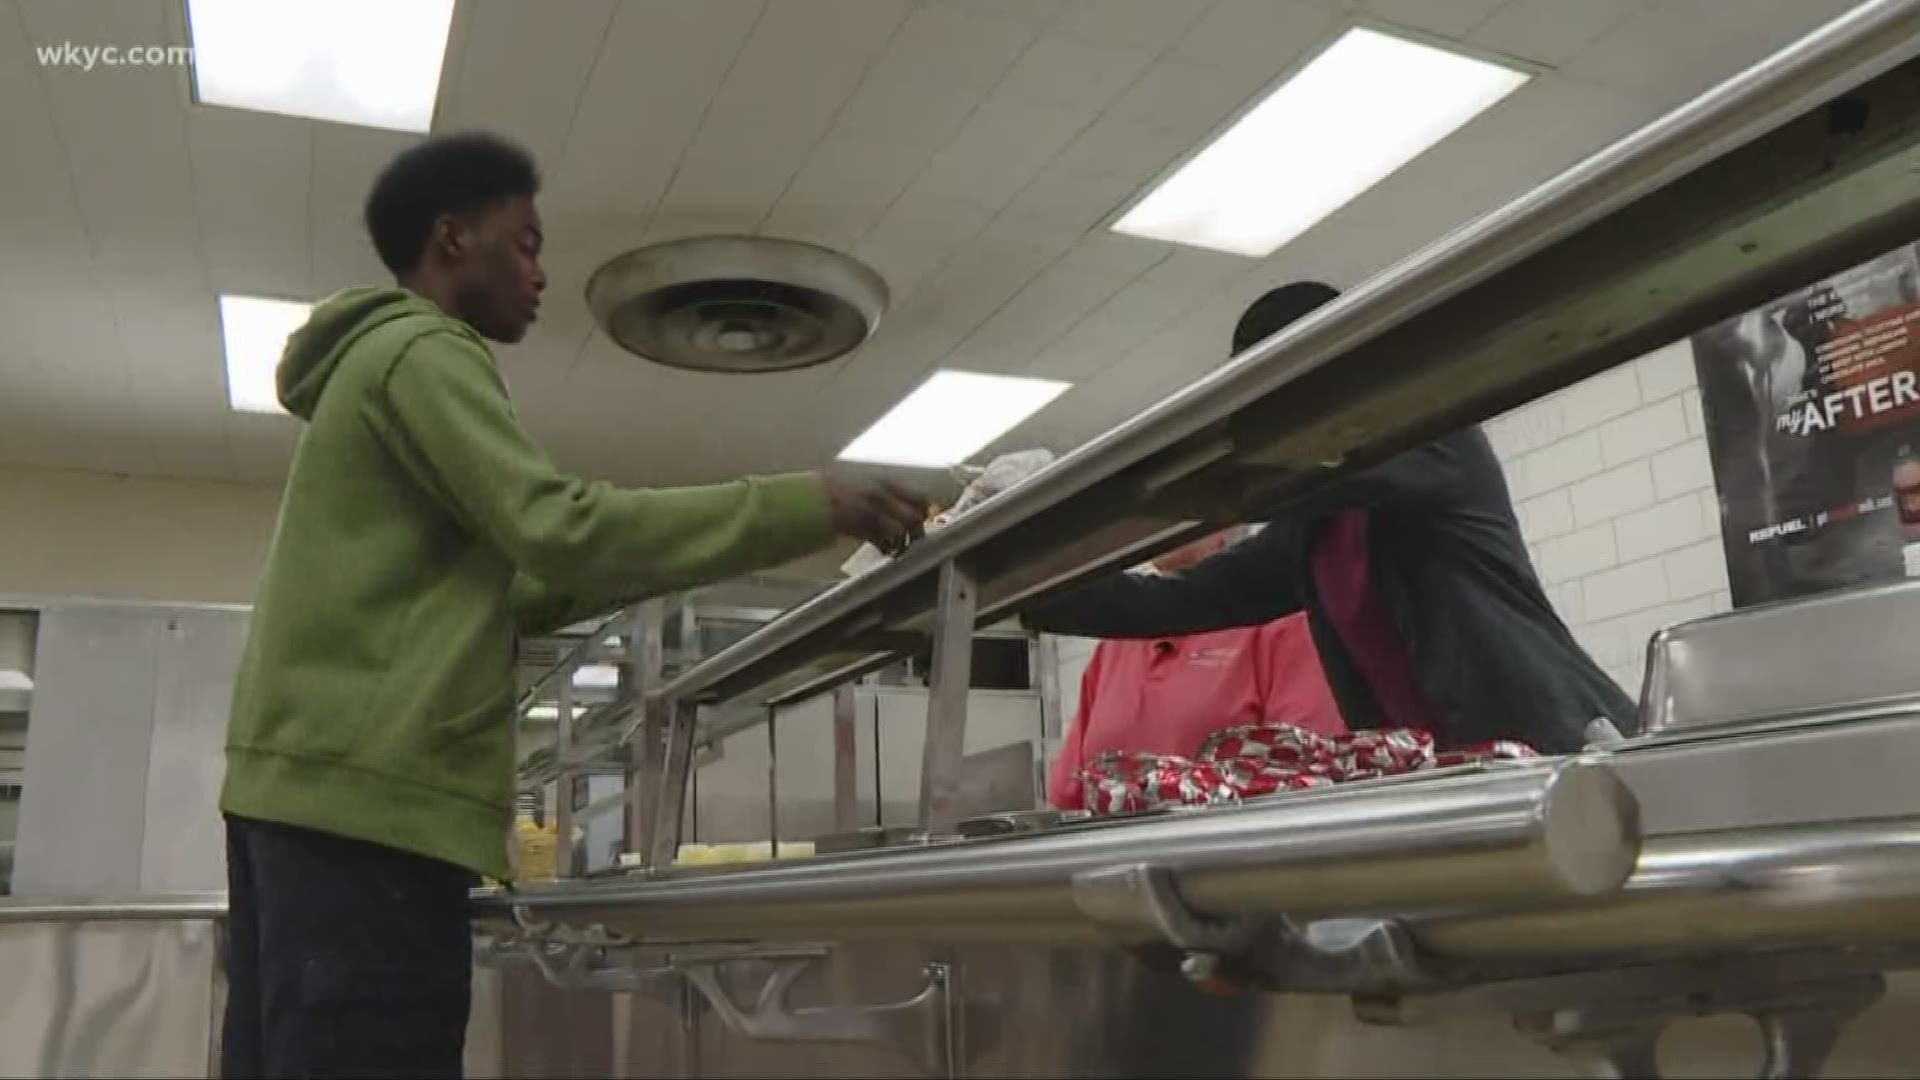 Schools, rec centers partner to feed 3 meals a day to anyone 18 and under. Brandon Simmons reports.